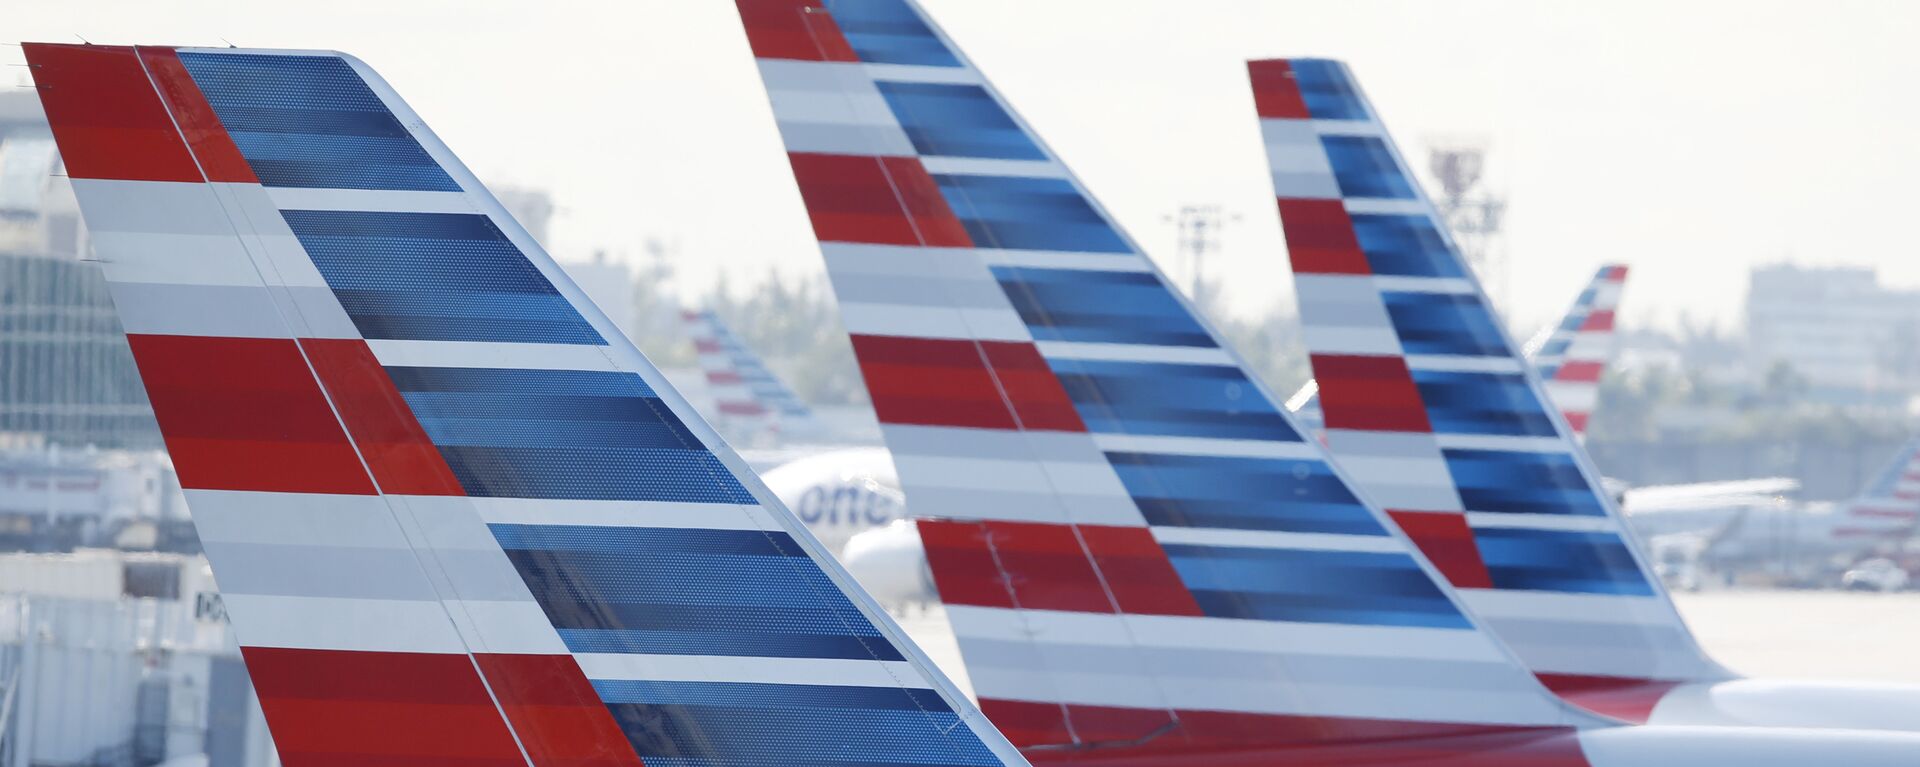 American Airlines tail fins all in a row as the planes are parked on the airport apron on Monday, 6 November 2017, at Miami International Airport in Florida. American Airlines and a subsidiary will pay $9.8 million in stock to settle claims that they failed to help disabled employees return to work. - Sputnik International, 1920, 21.06.2021